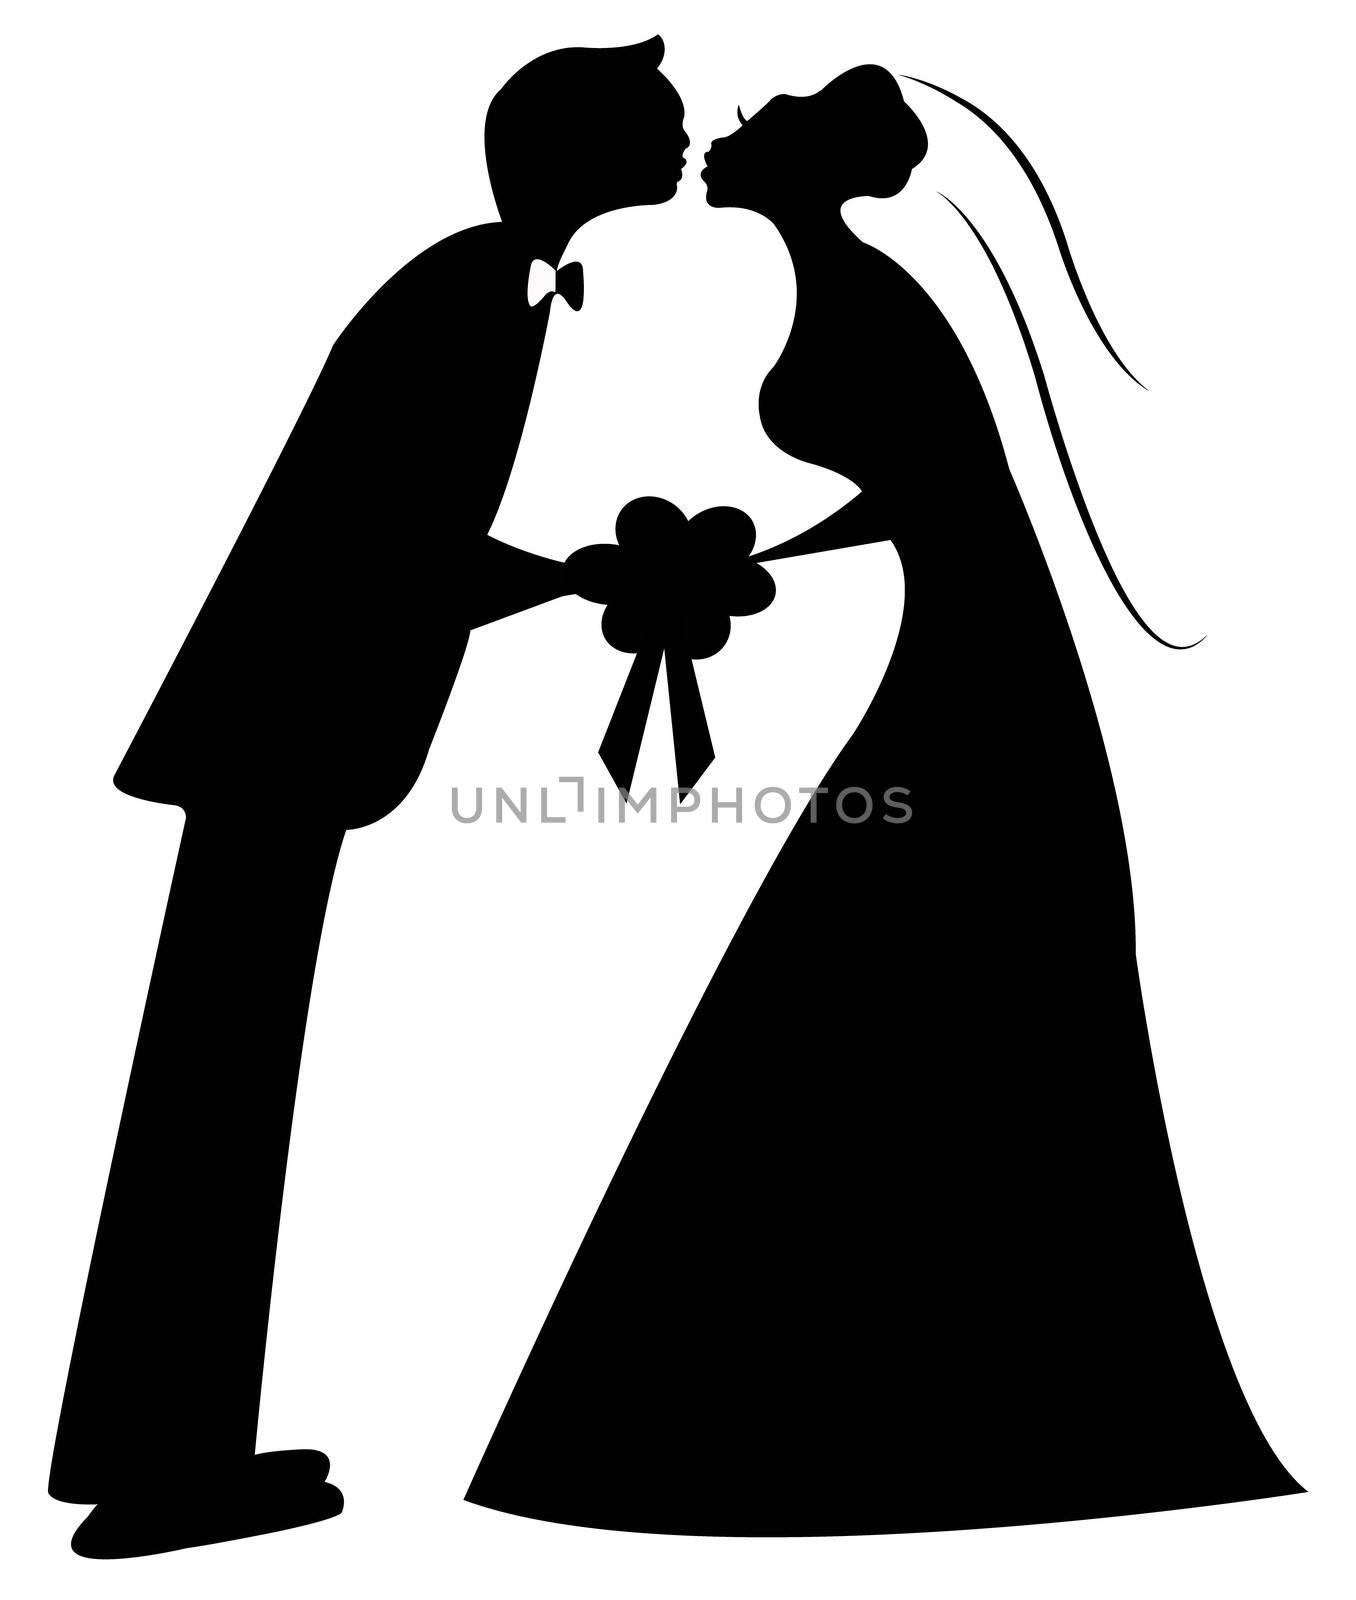 kissing the bride, sketch vector by Dr.G